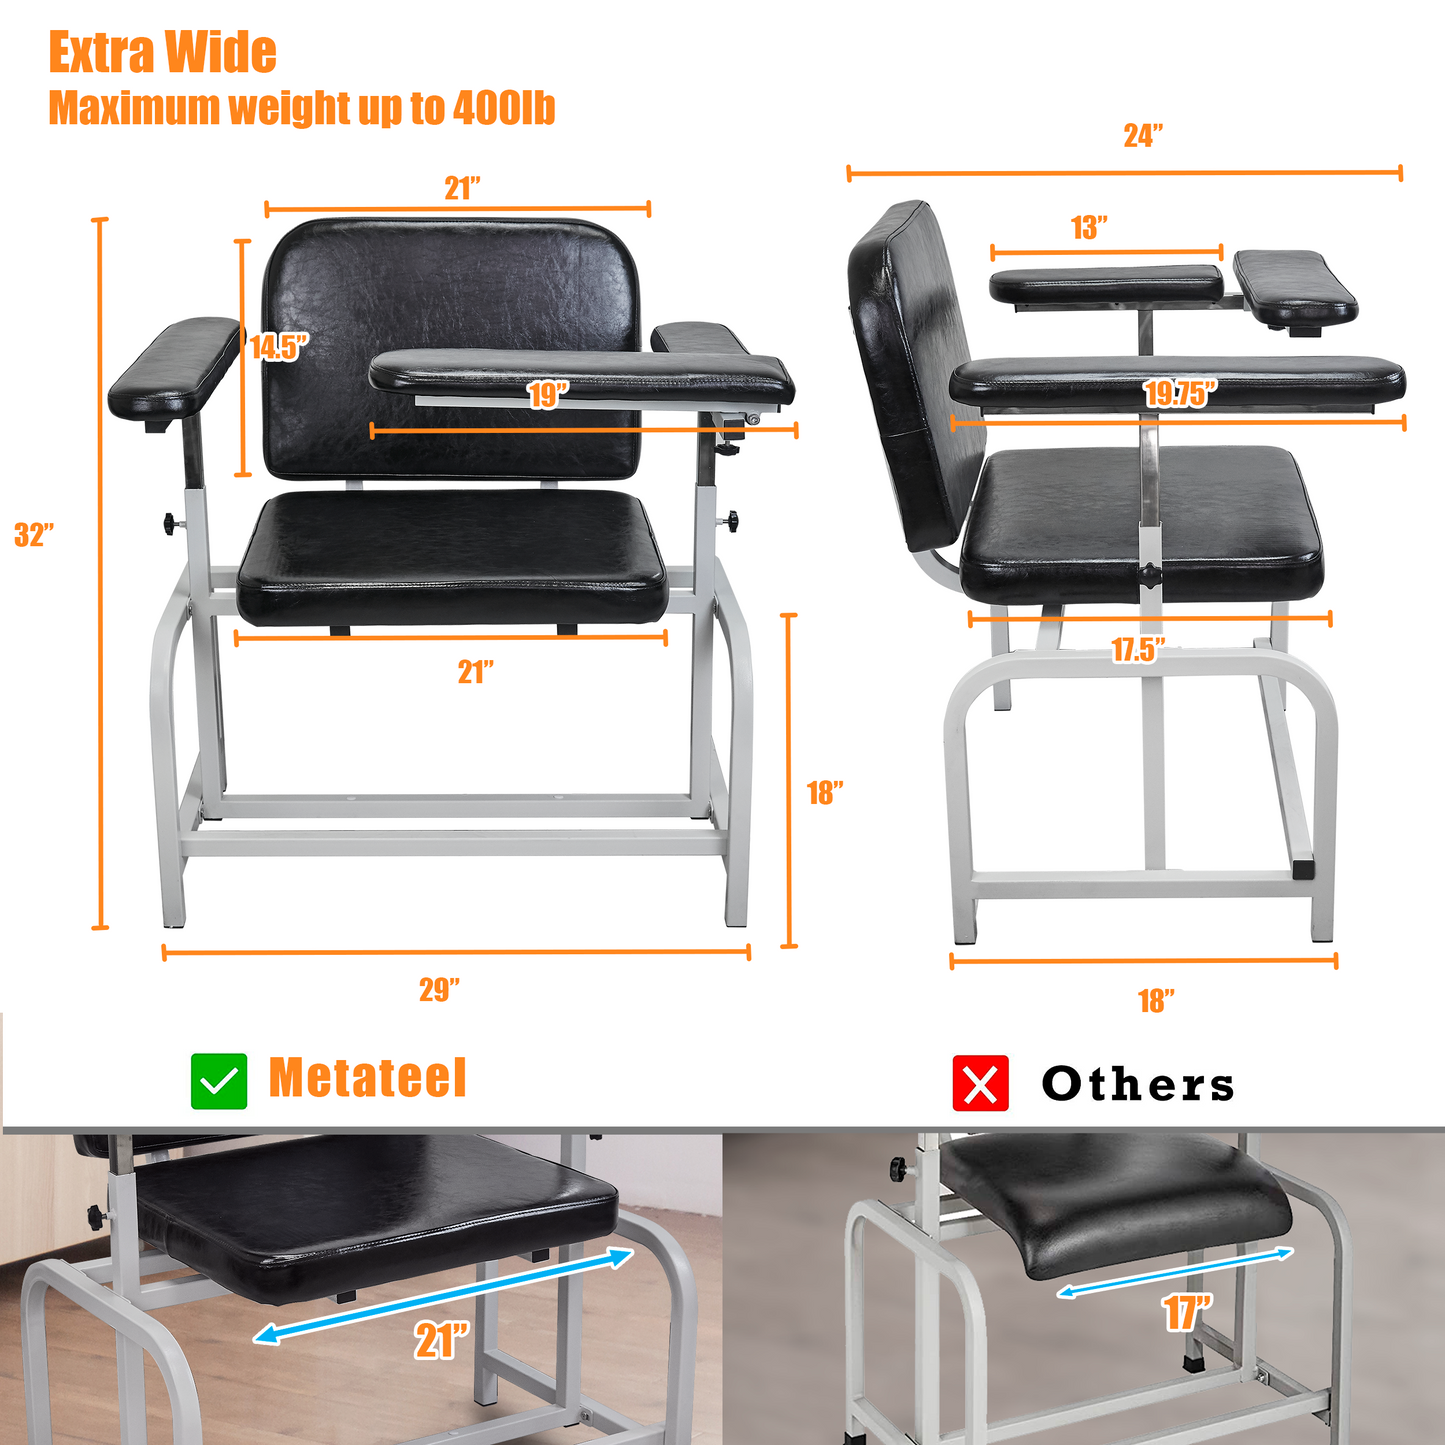 M-T10-H - Extra Large Padded Phlebotomy Chair with Adjustable Armrest and Steel Frame - Extra Large PU Leather Blood Drawing Chair for Hospital, Lab, and Medical Facilities